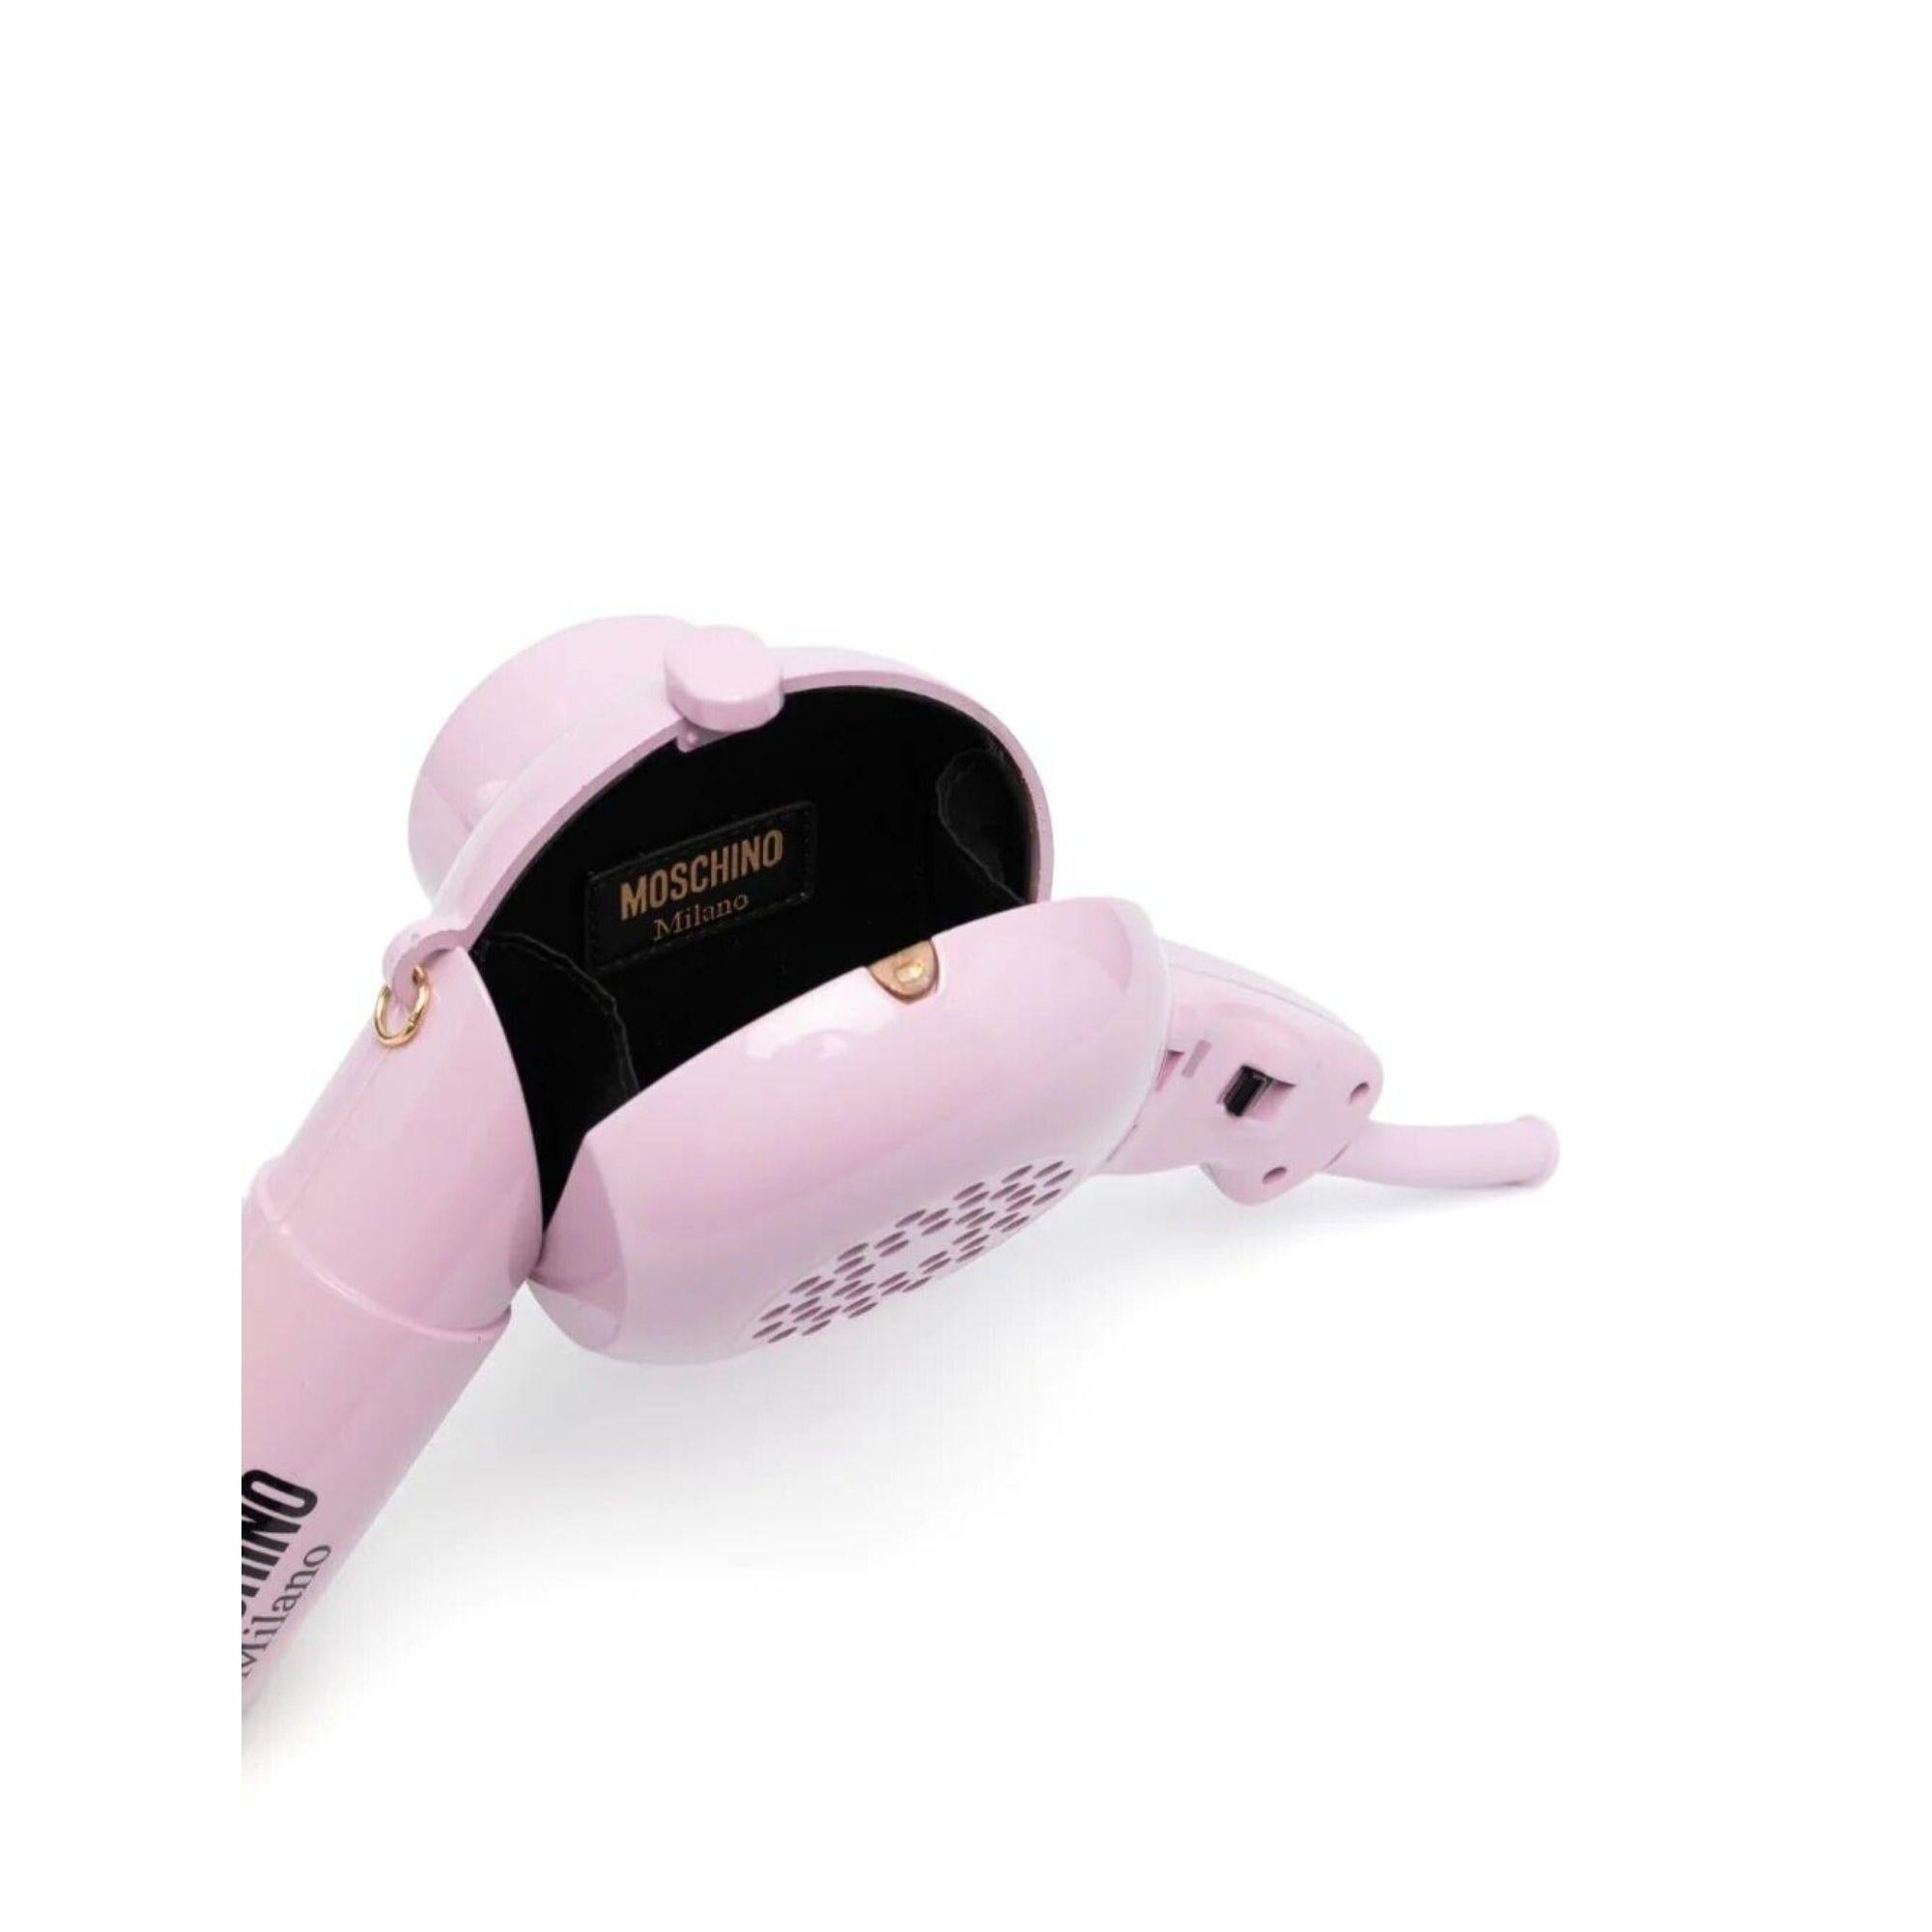 AW21 Moschino Couture Blow Dryer Mini Shoulder Bag by Jeremy Scott 8